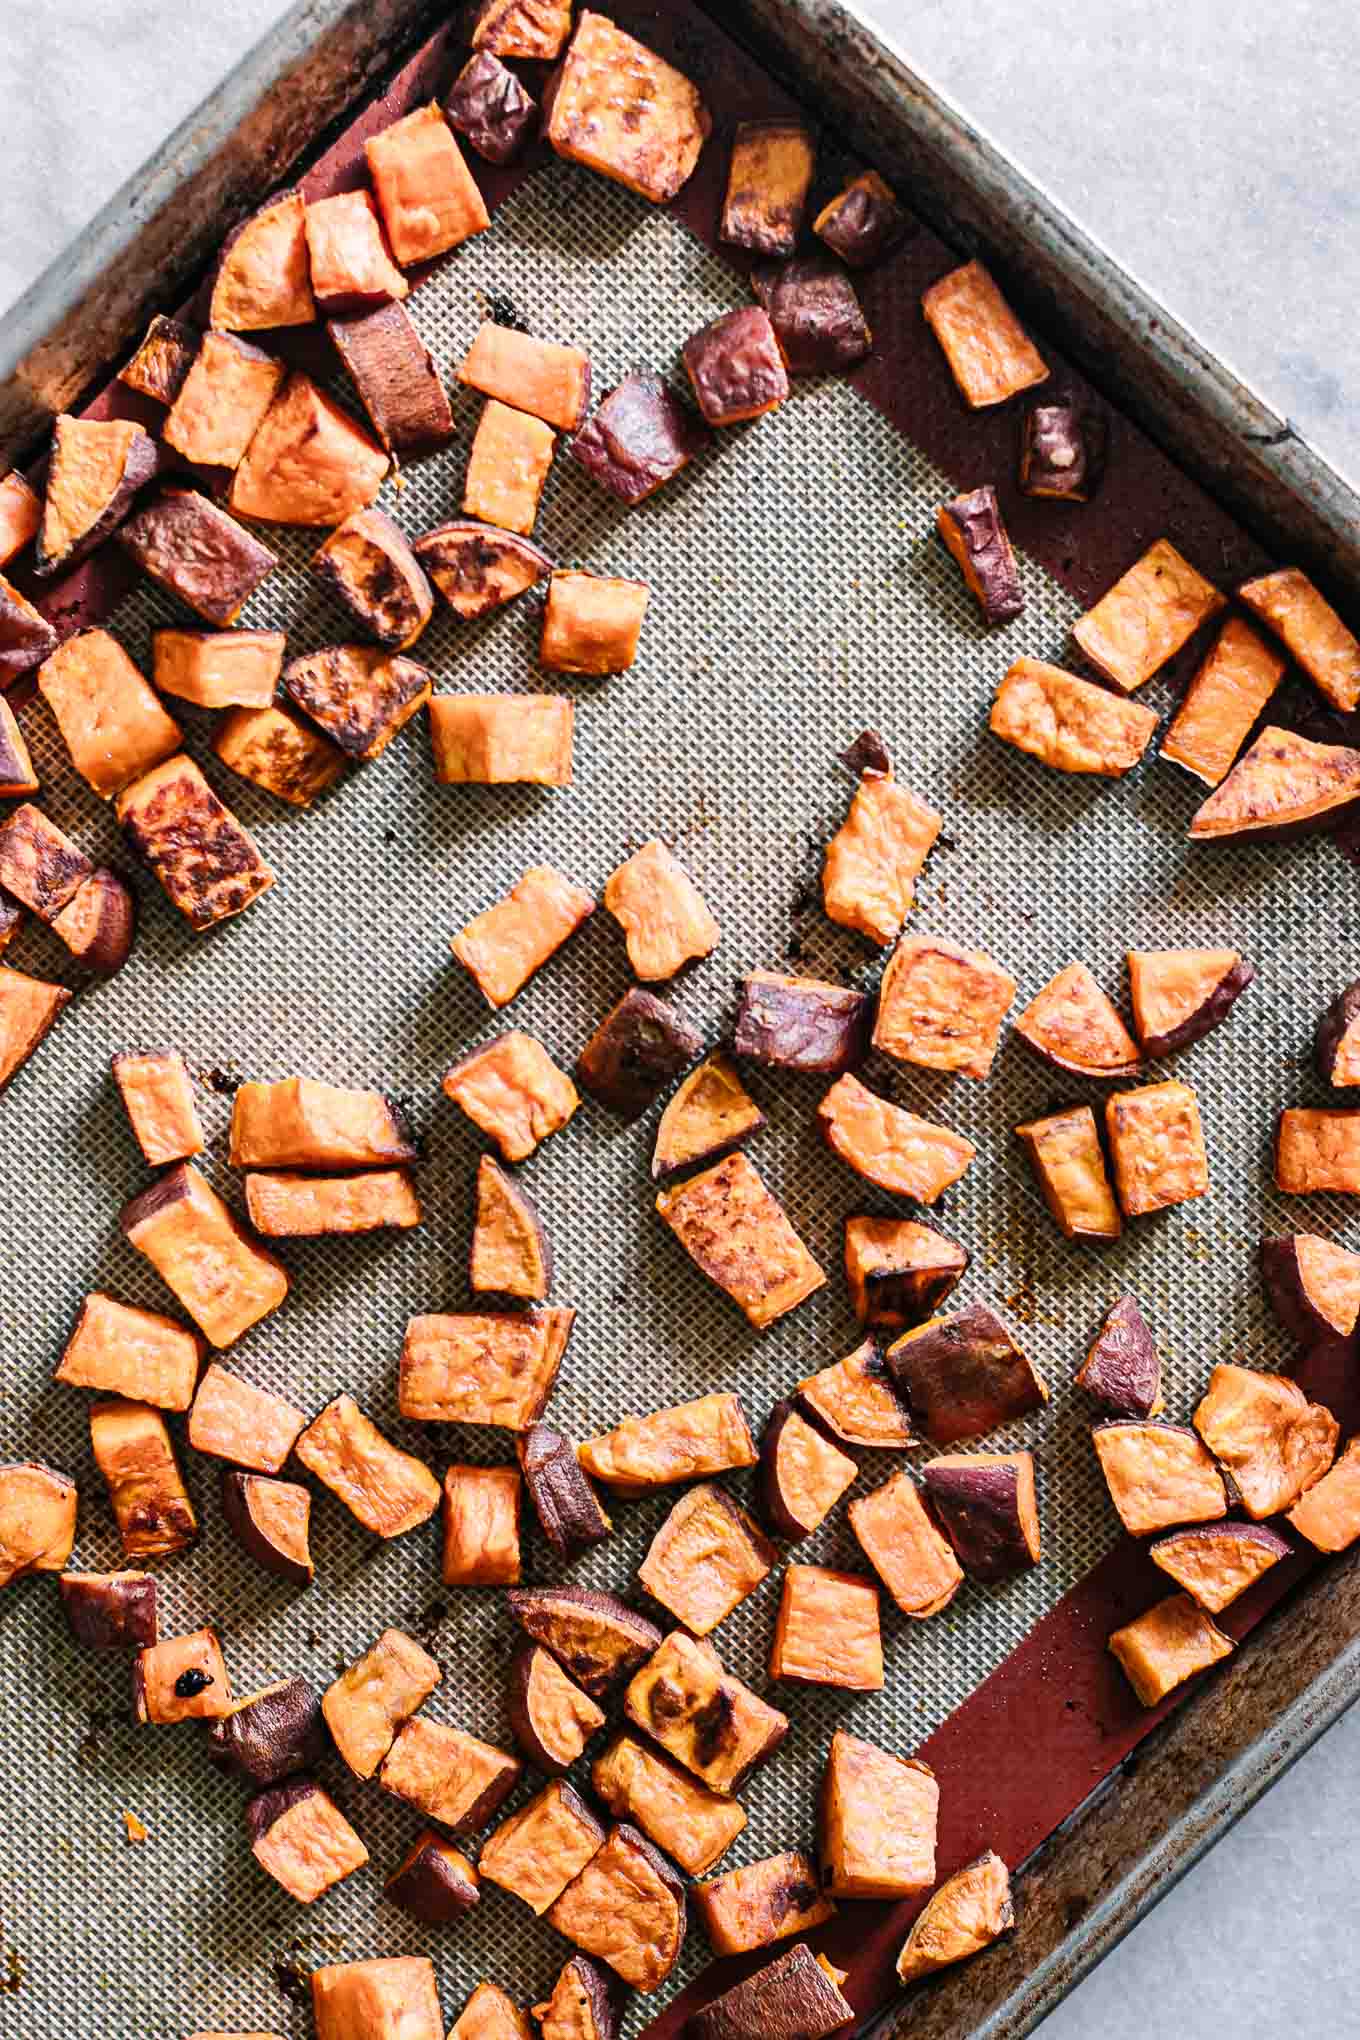 baked sweet potatoes on a sheet pan after roasting